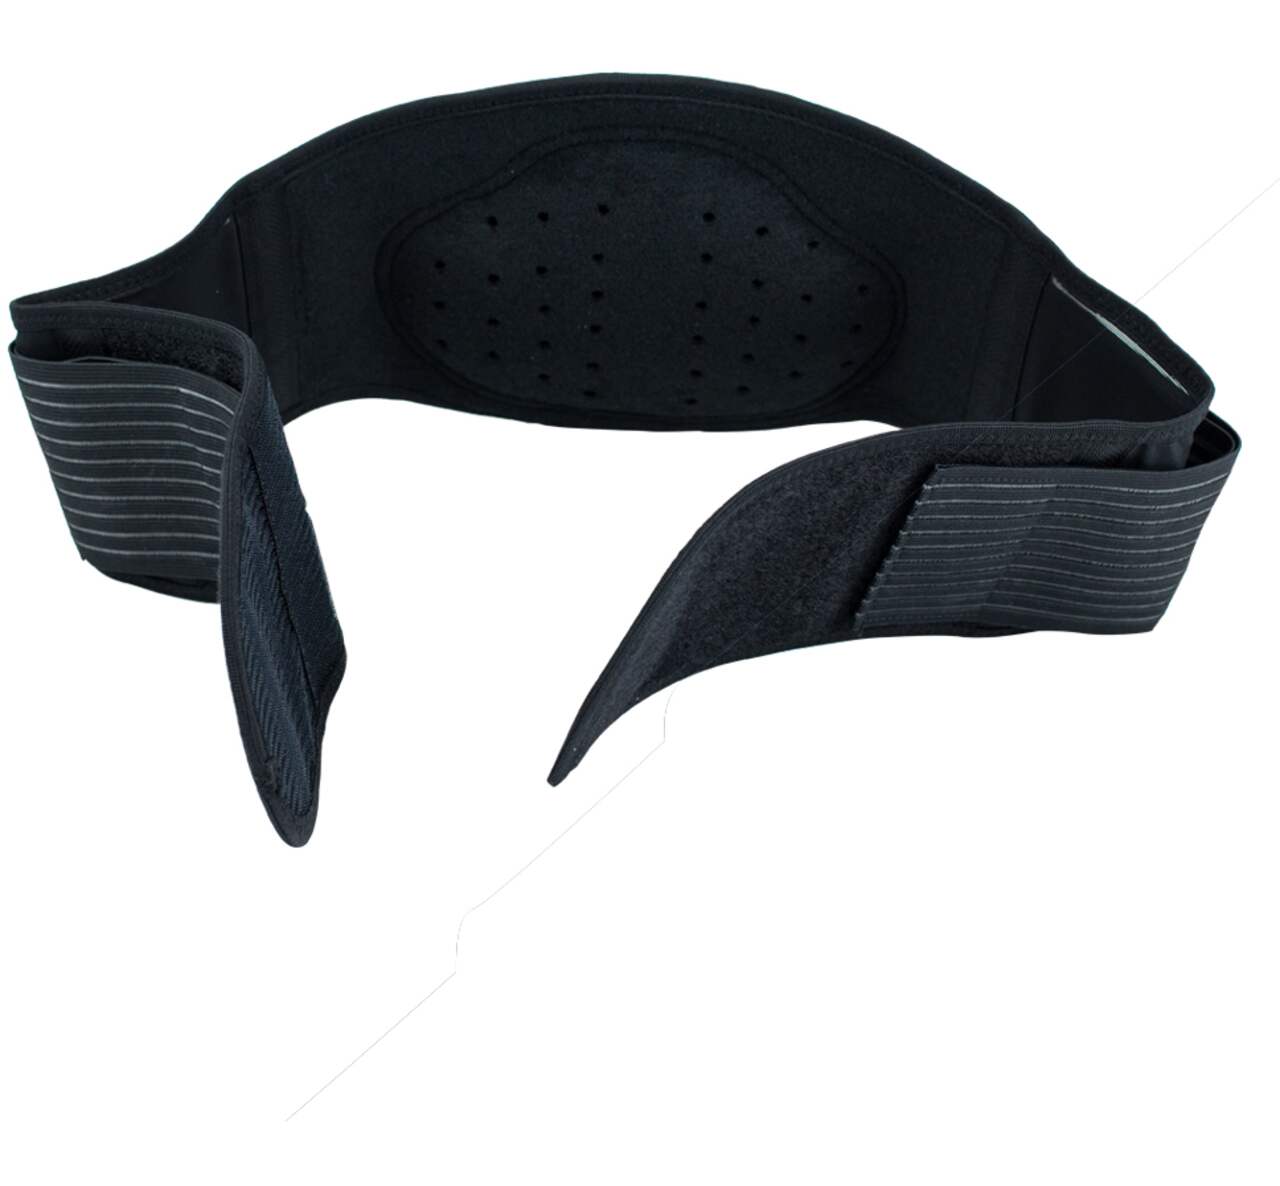 https://media-www.canadiantire.ca/product/living/personal-garment-care/personal-care/0746328/obusforme-men-s-support-belt-small-96ebd210-6bb6-4adf-9963-c7a178635d88.png?imdensity=1&imwidth=1244&impolicy=mZoom